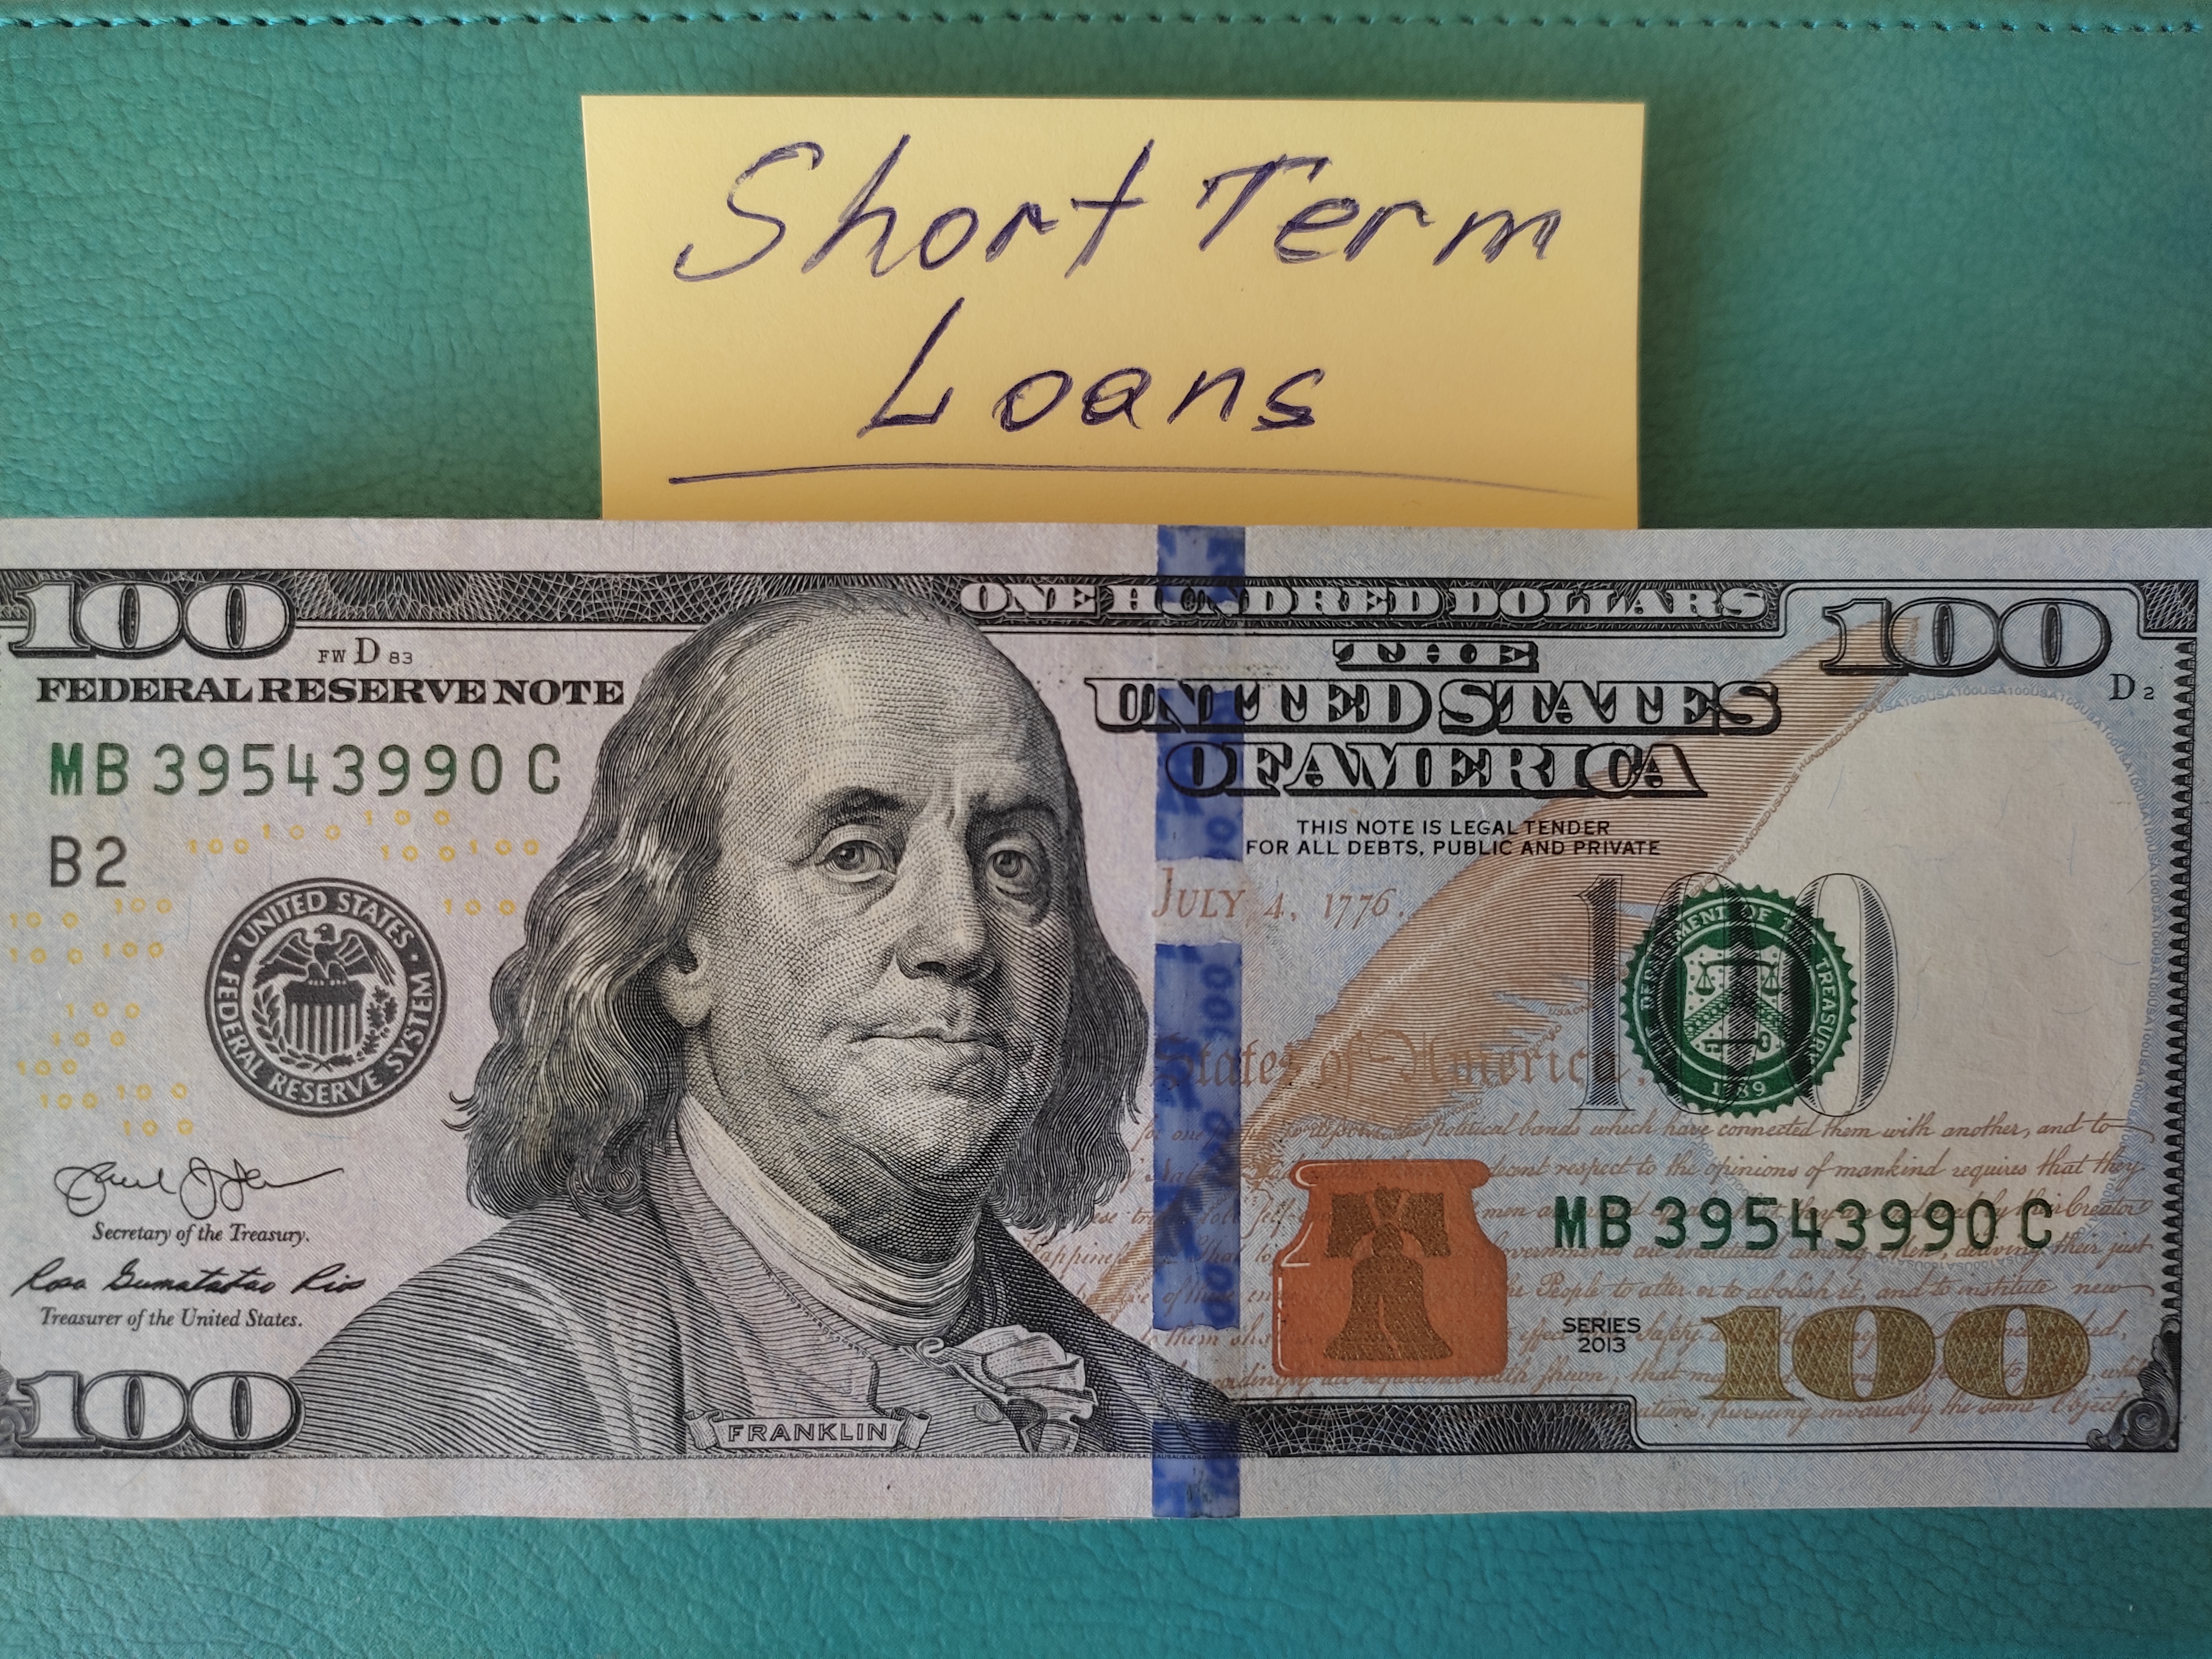 There are dollars and a yellow sticker on the table that says short term loans.